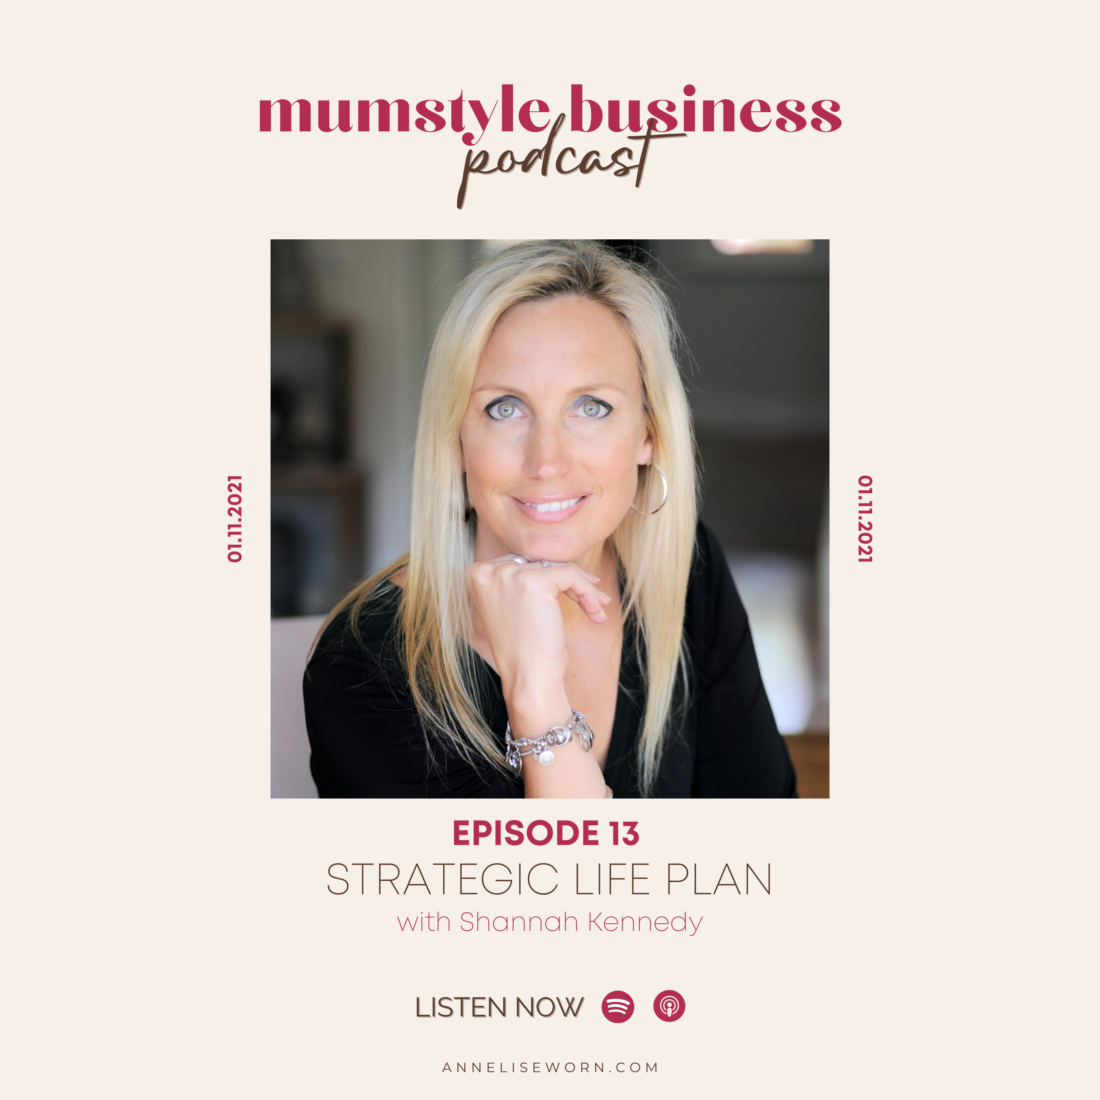 MUMSTYLE BUSINESS PODCAST - Episode 13 - Strategic Life Plan with Shannah Kennedy